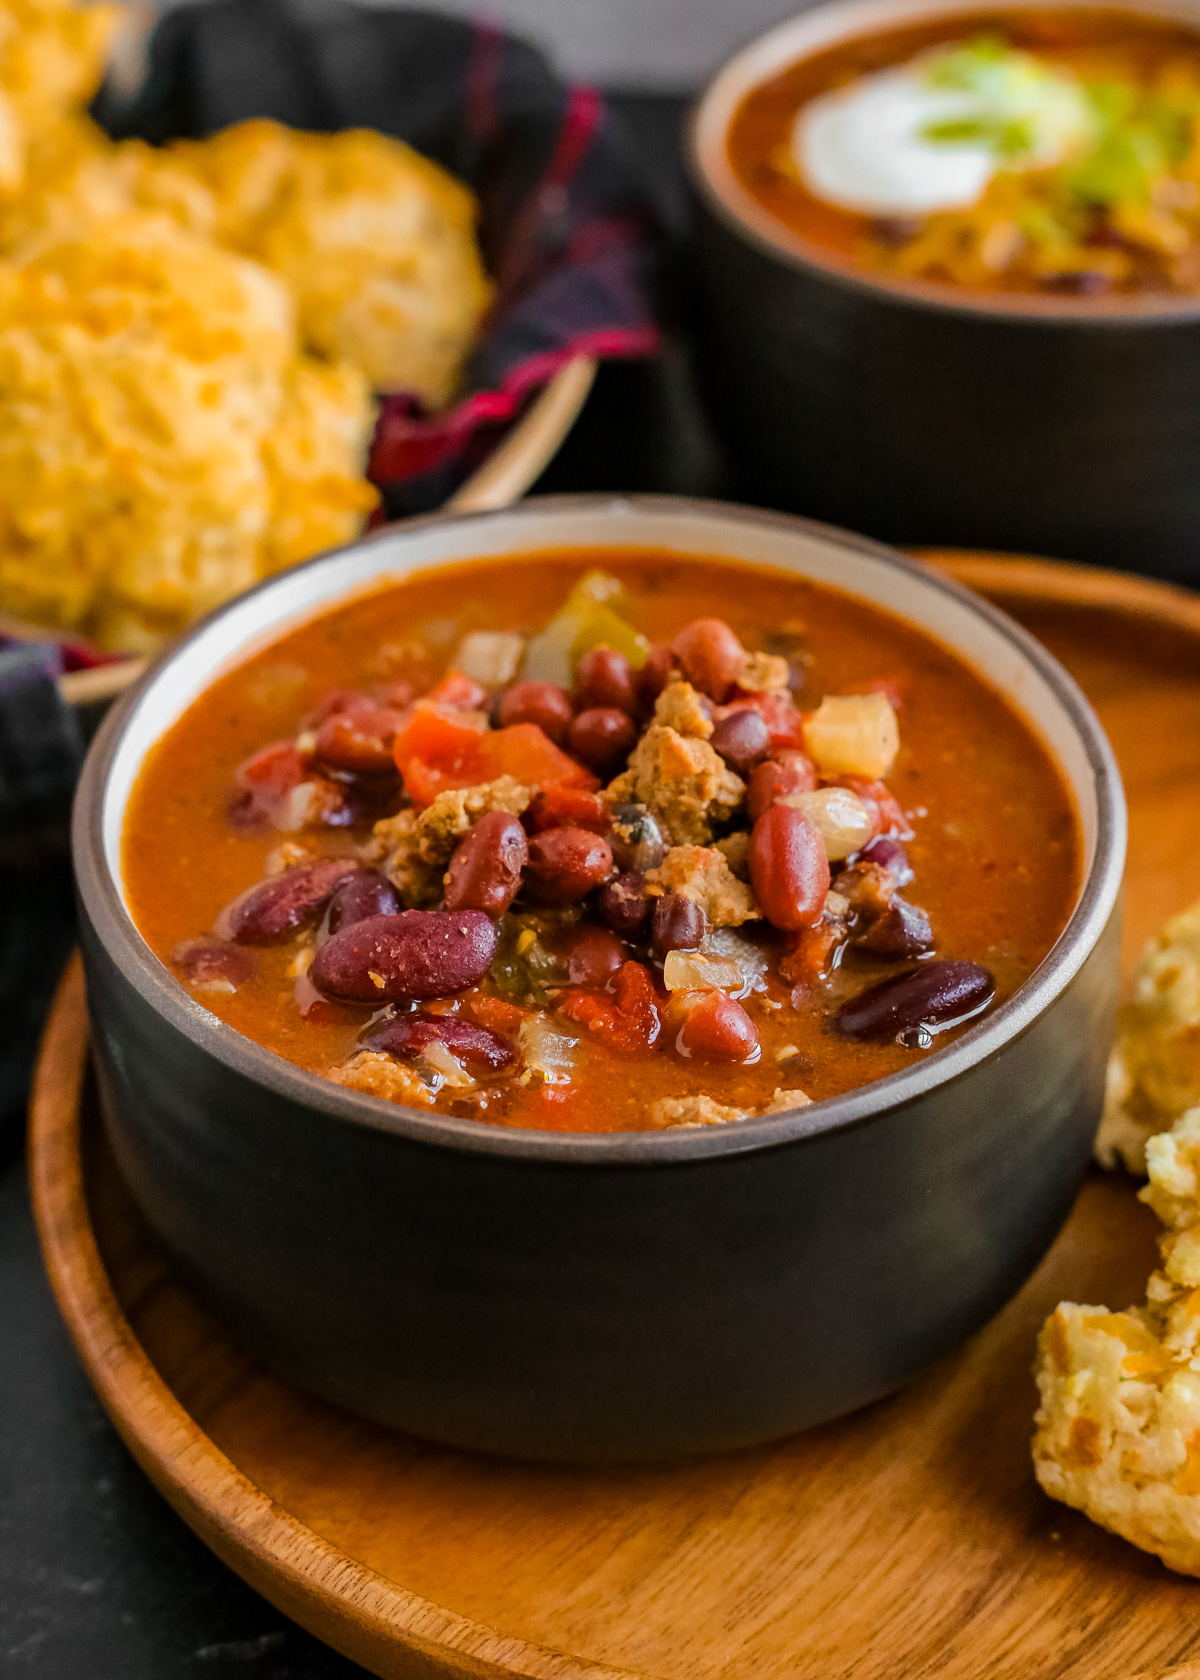 A dark ceramic serving bowl filled to the brim with a three bean lamb chili served on a wooden bowl with cheddar biscuits surrounding it. Pieces of tomato, onion, and ground lamb are visible in the rich, dark red stew